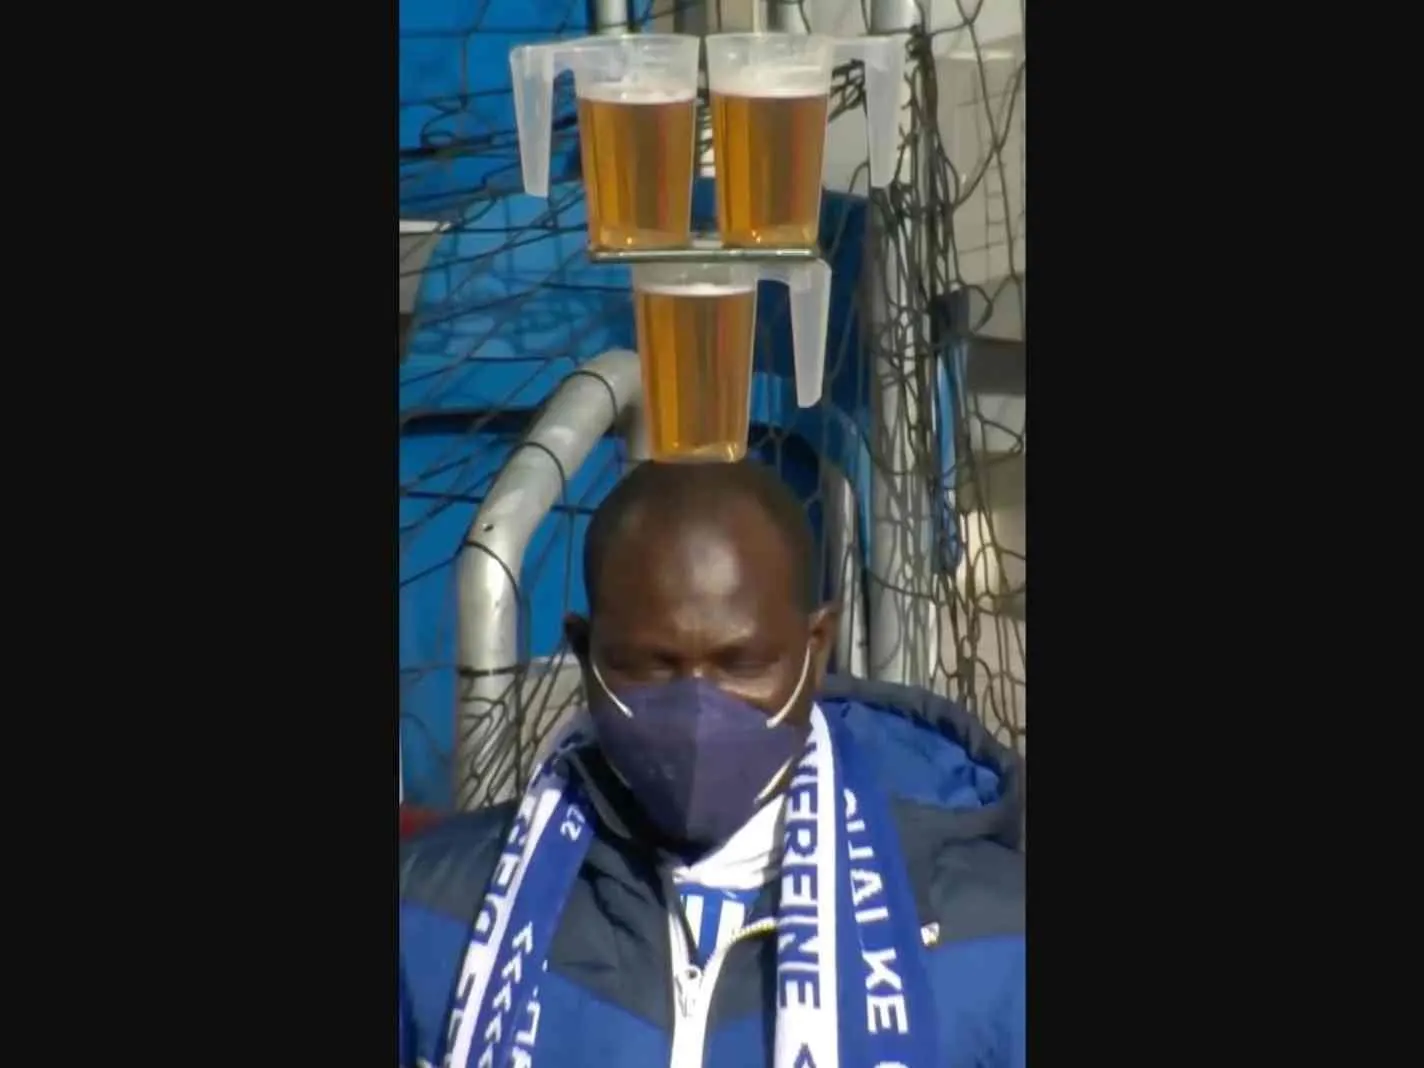 In this image - Schalke fan balancing 3 beer glasses on his head